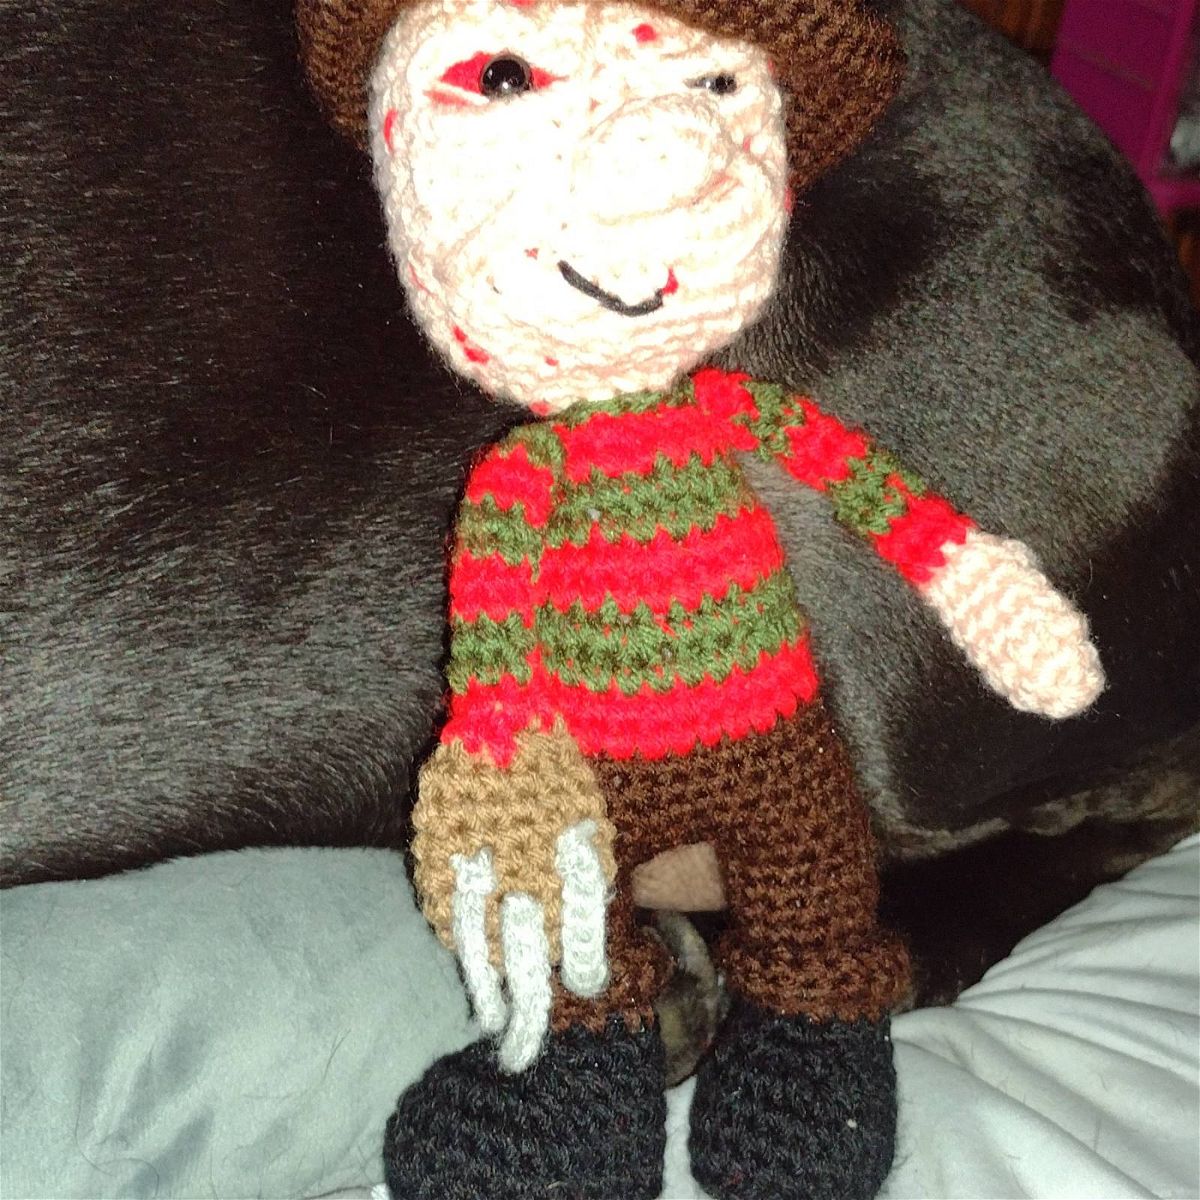 Freddy Krueger Doll Crochet Pattern Review by Erin Morvan for Cottontail Whiskers